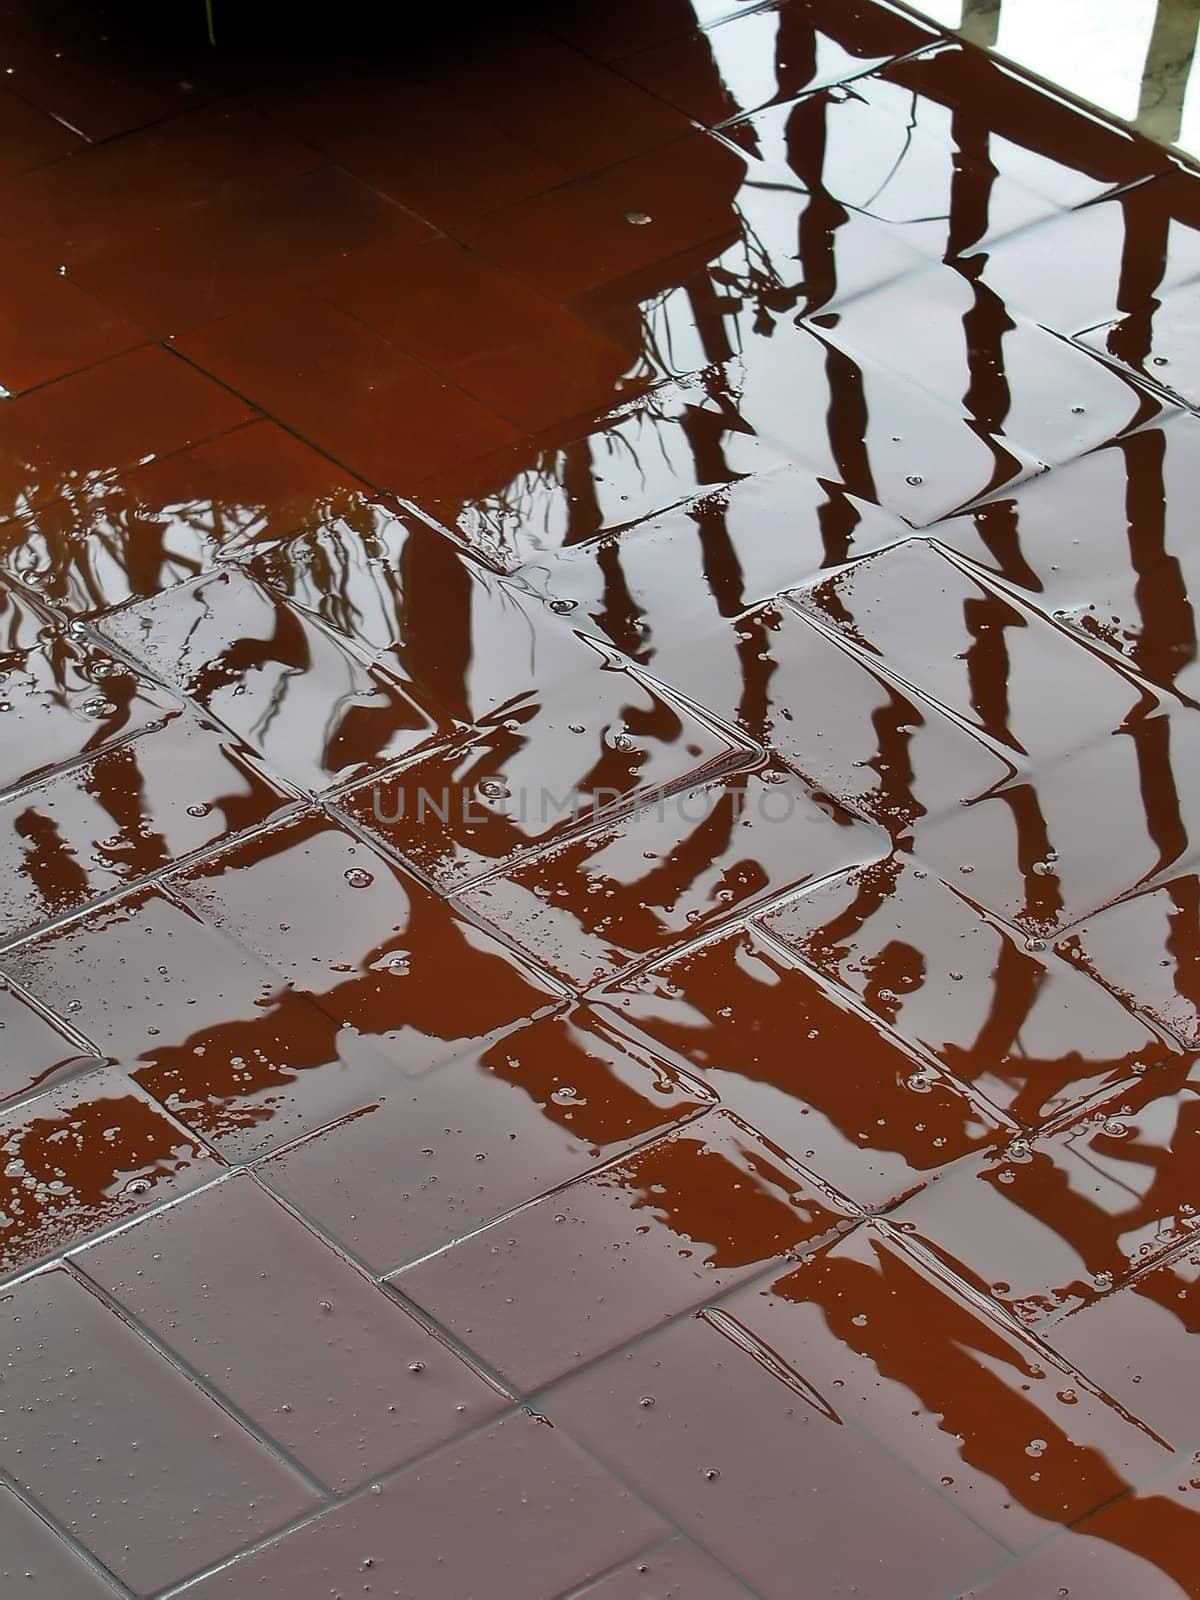 Reflections on wet pavement in the rain       